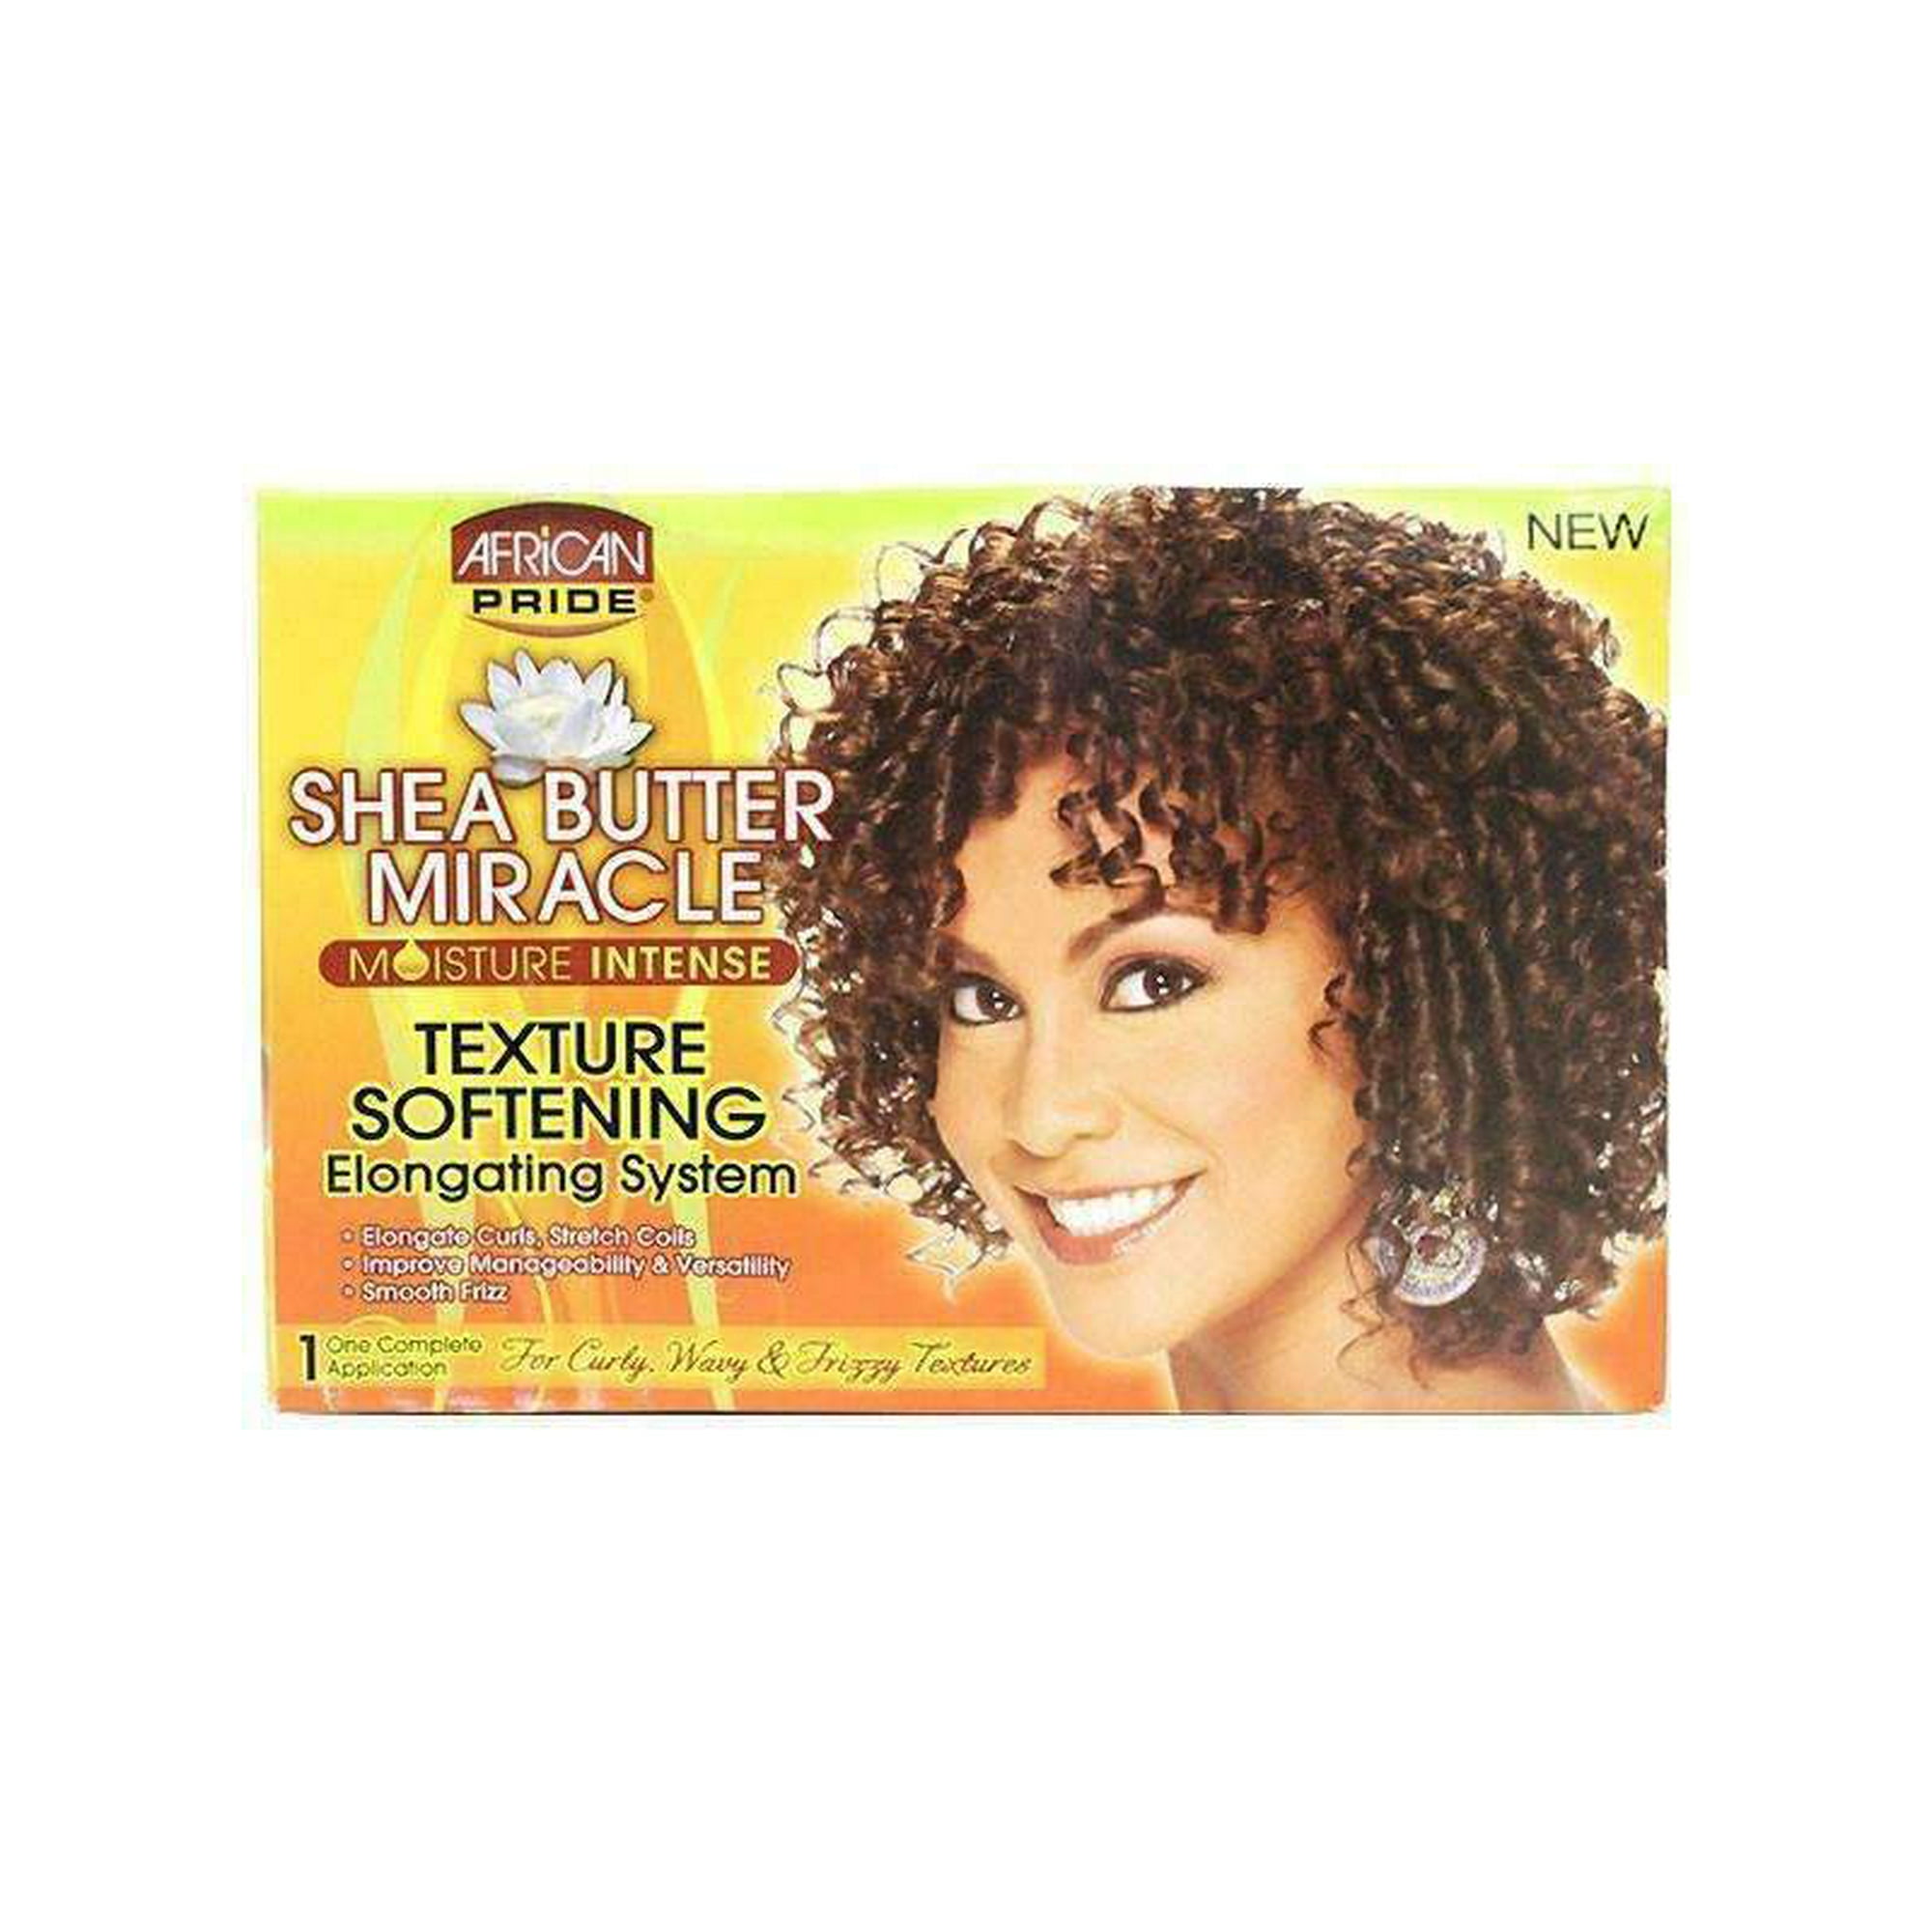 African Pride Shea Butter Miracle Texture Softening Elongating System Walmart Canada